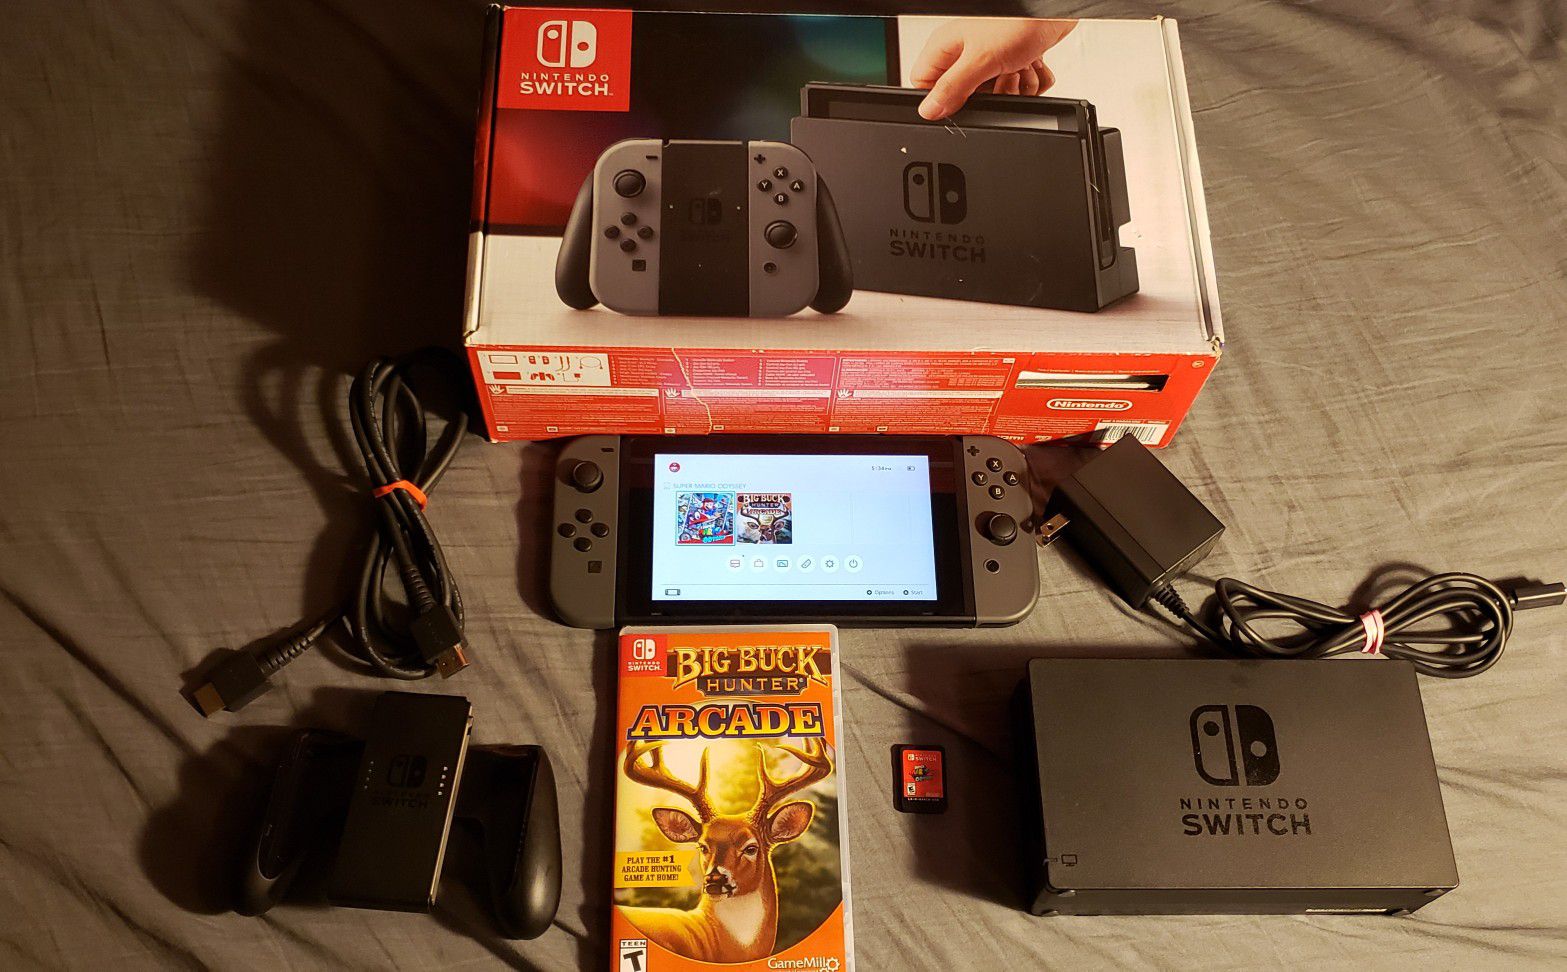 Nintendo Switch with box and 2 games for $260